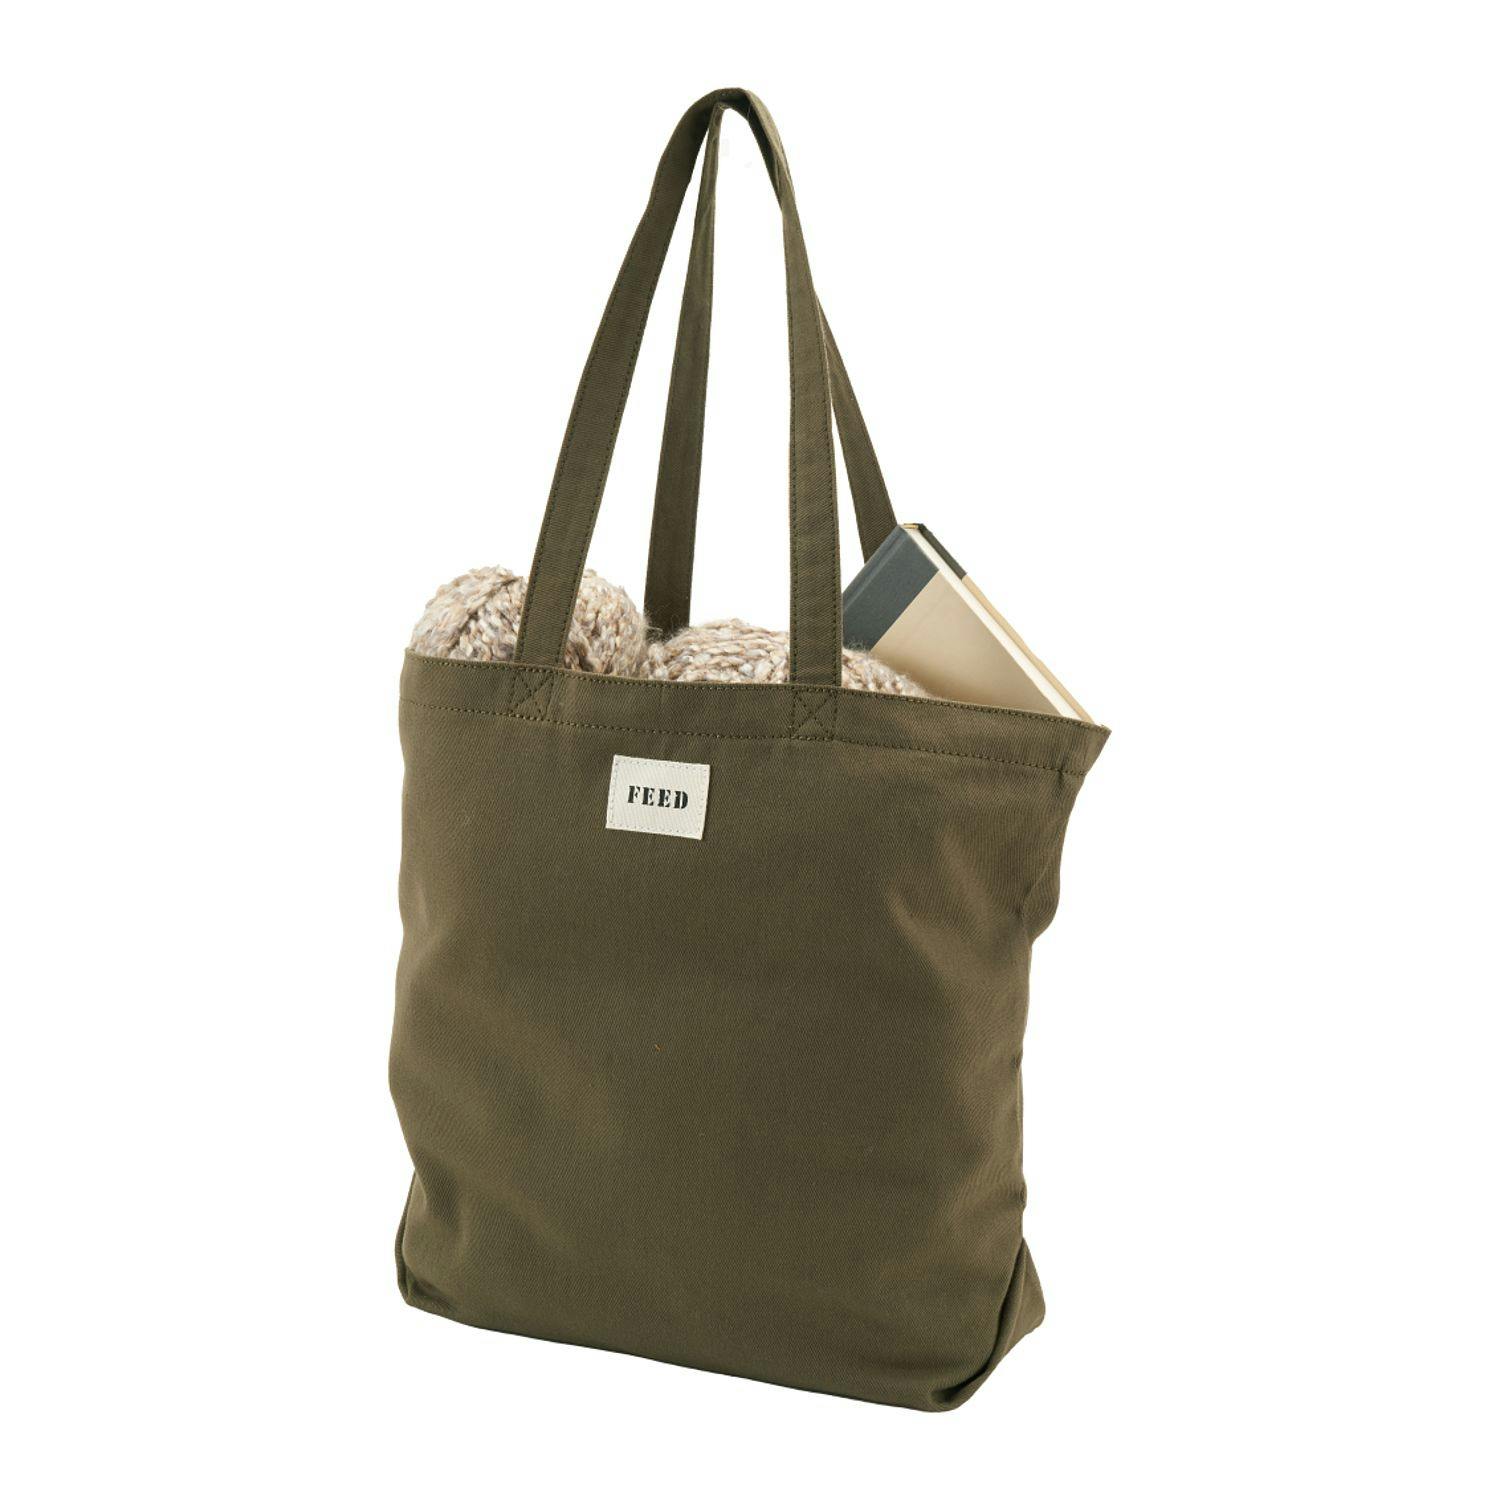 FEED Organic Cotton Shopper Tote - additional Image 2